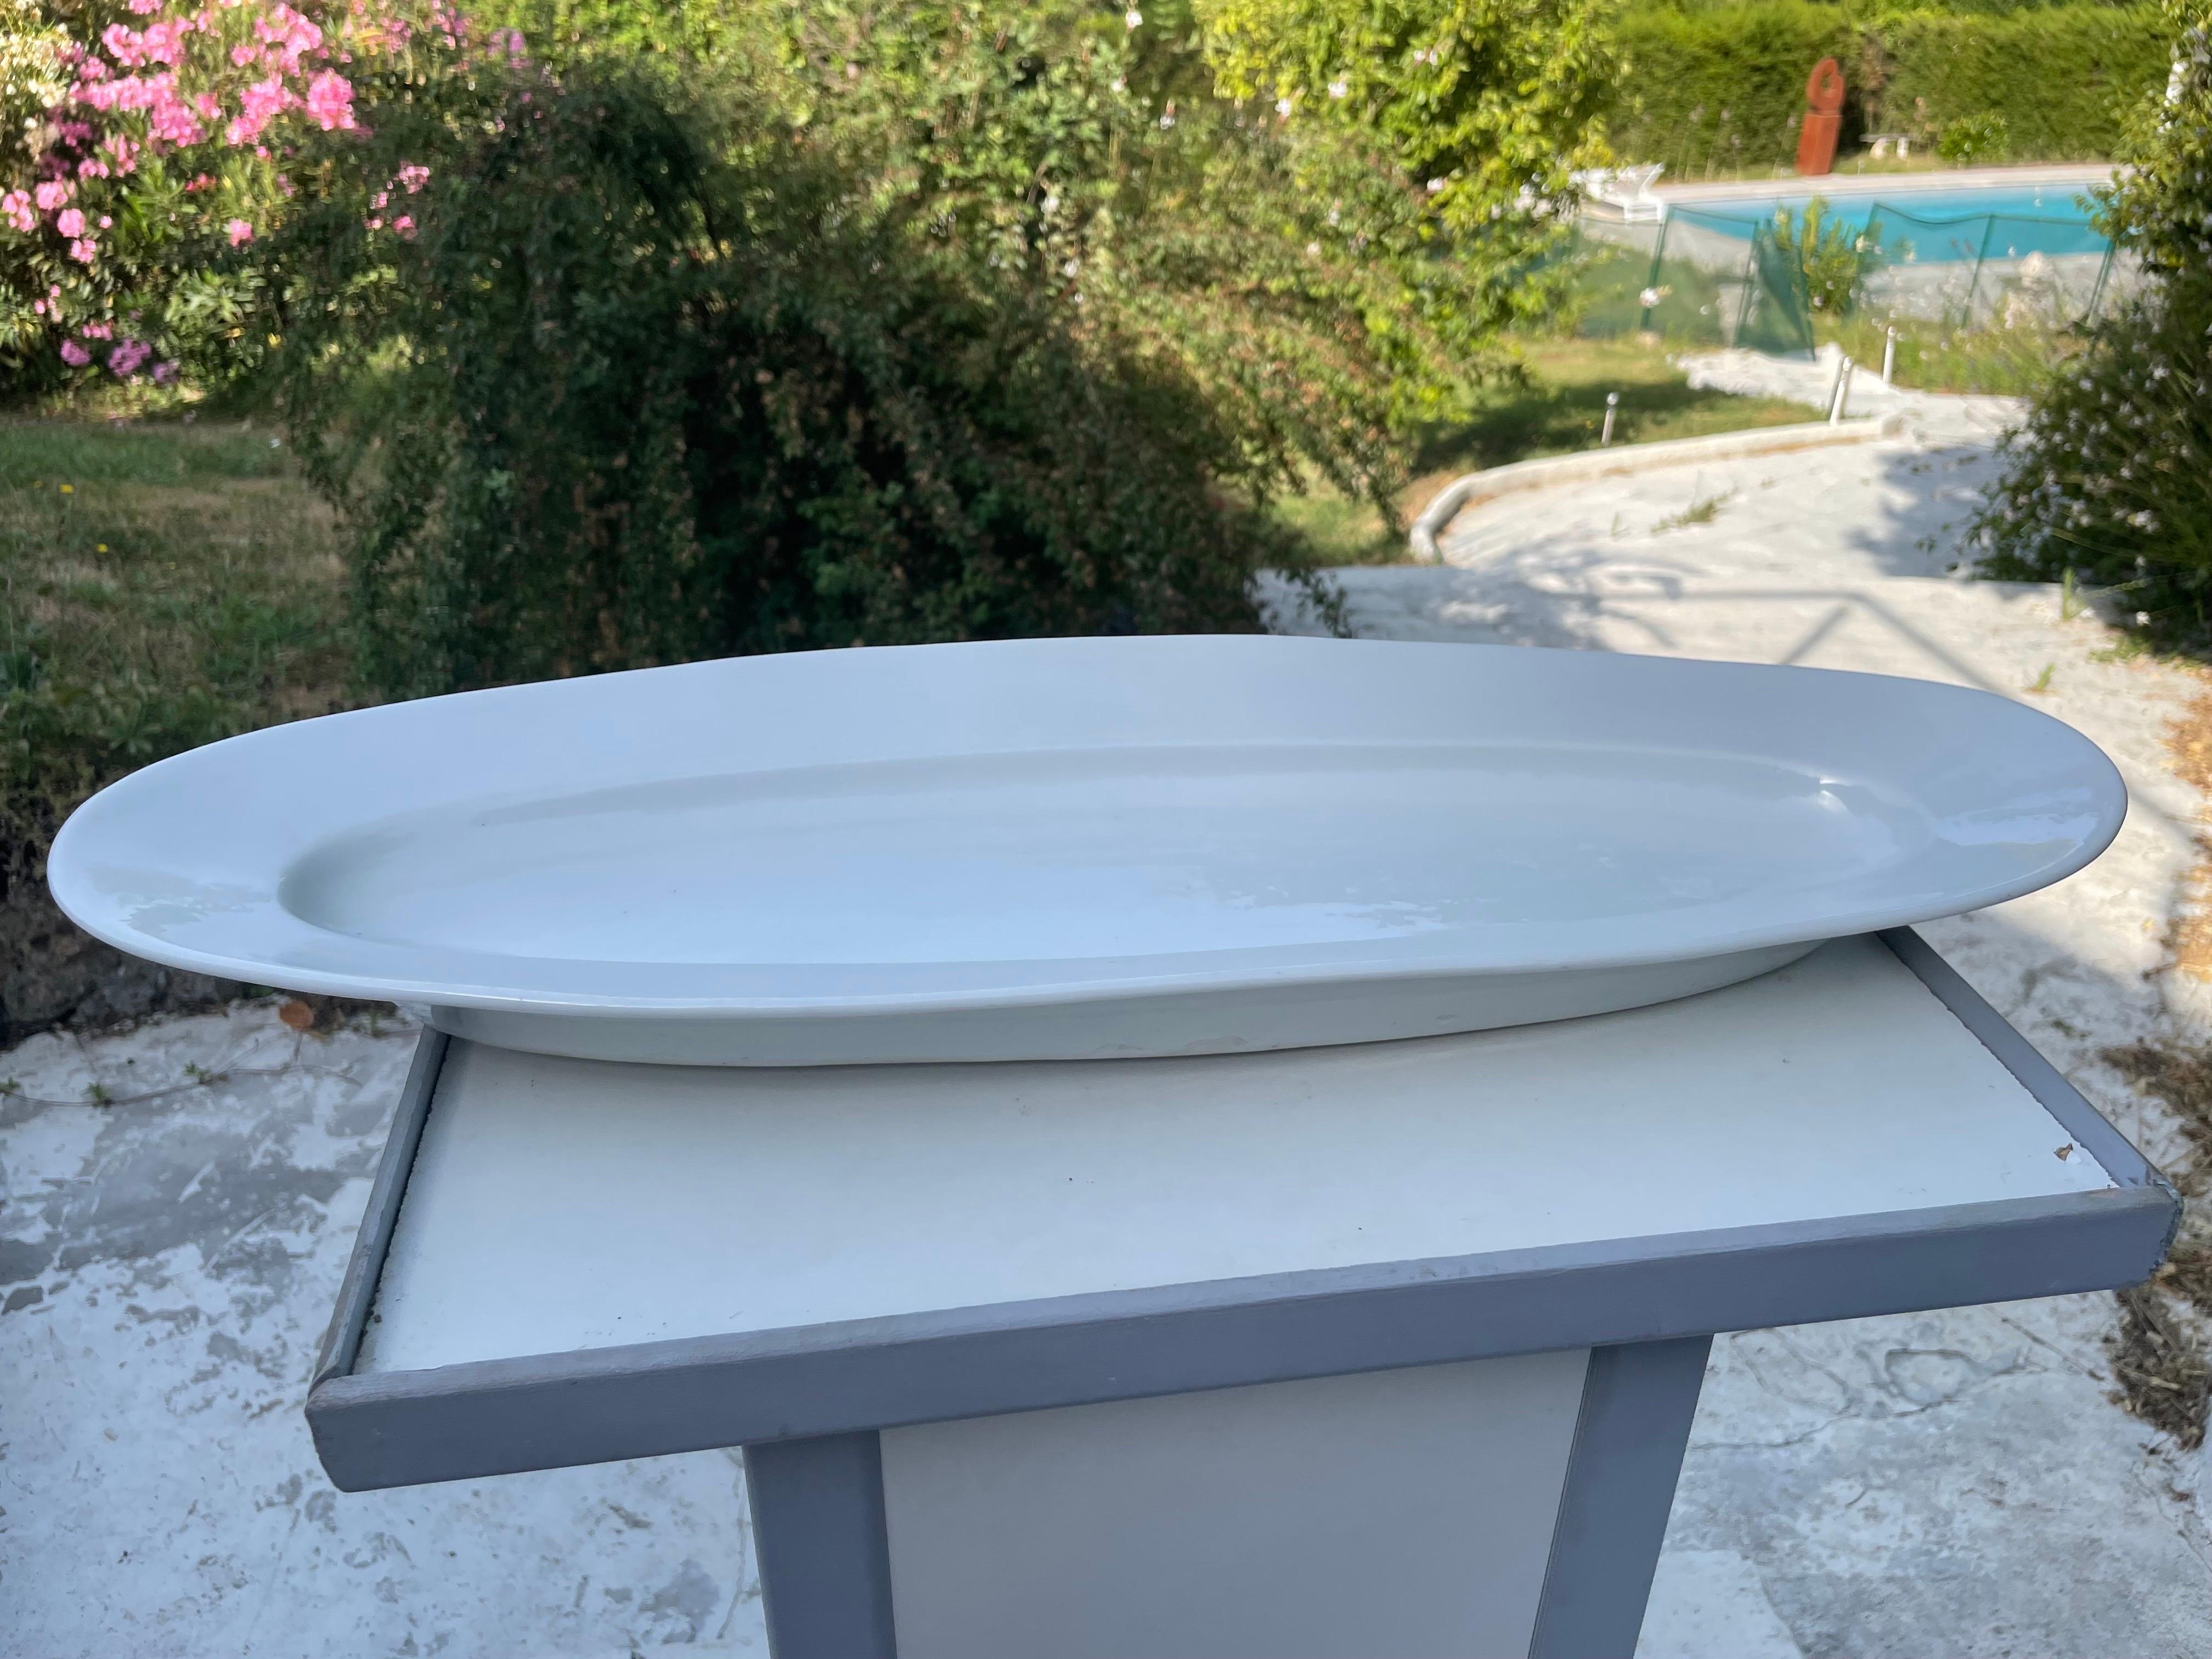 It is a white porcelain dish dating from the beginning of the 20th century. It was made in France, and is signed below. It is a dish which is of very good quality, and which is very heavy. It is suitable for serving fish because its shape has a good